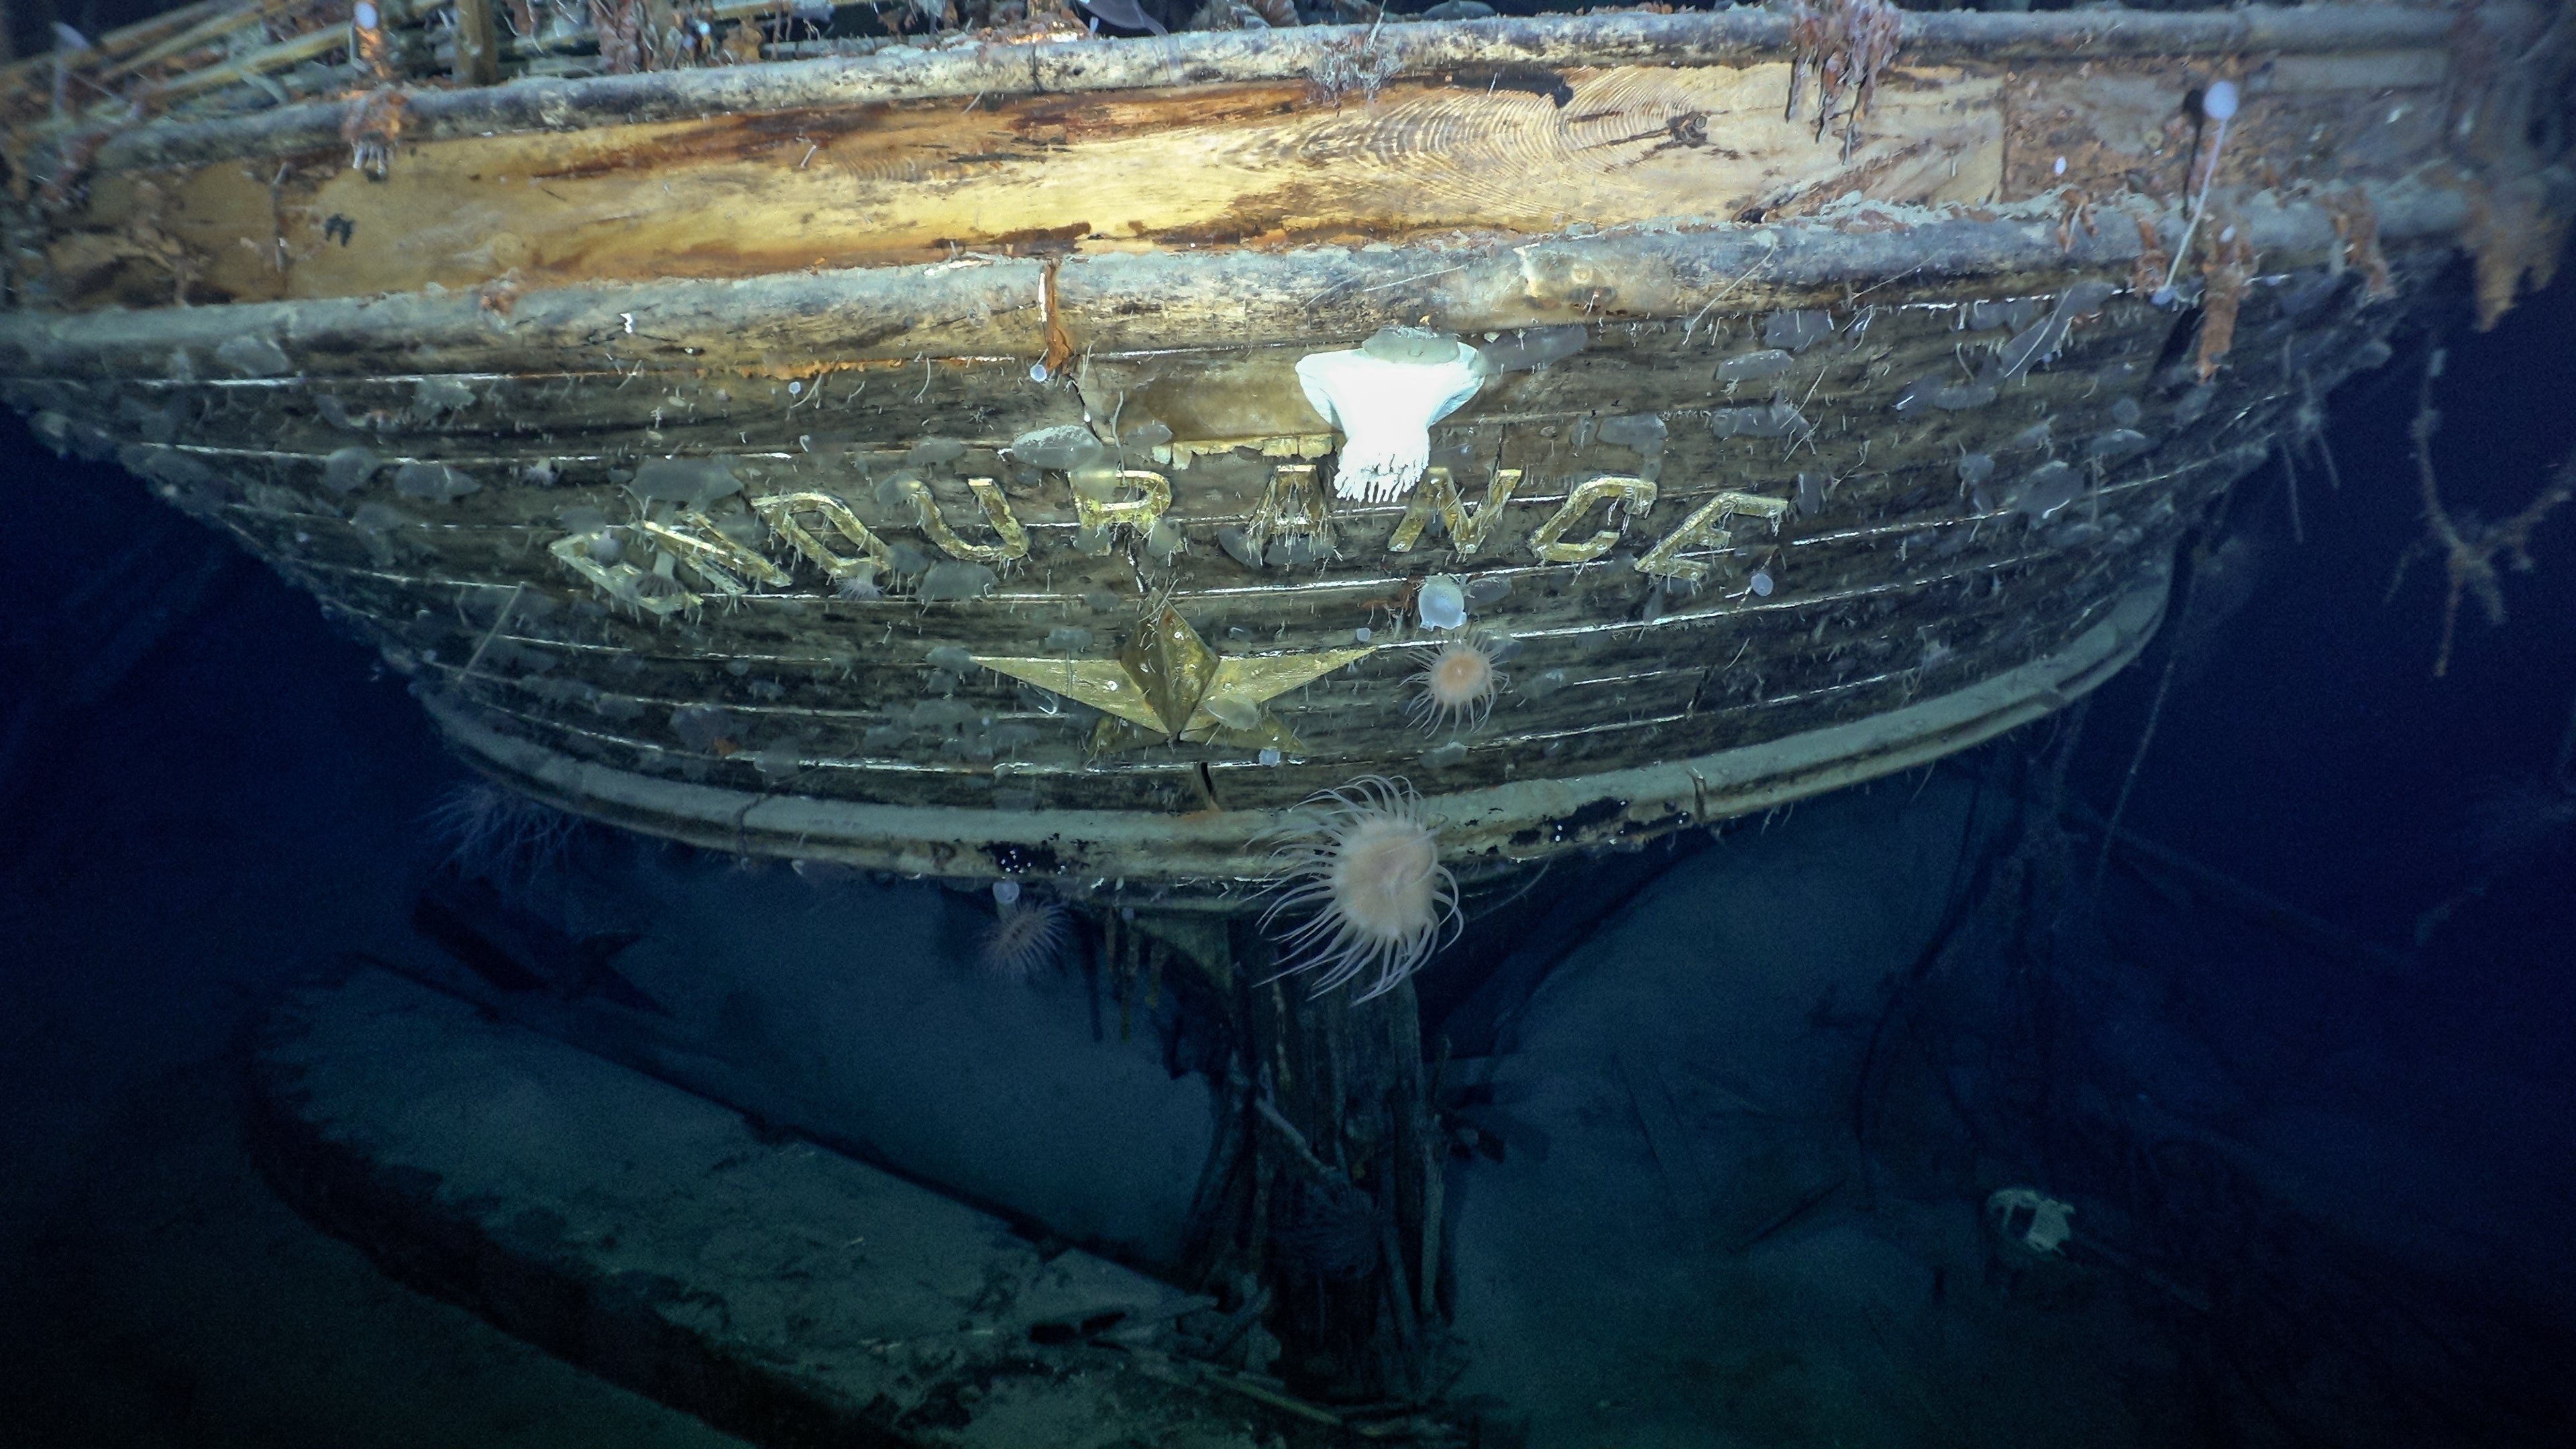 The stern of the wreck of the Endurance, its name still clearly legible